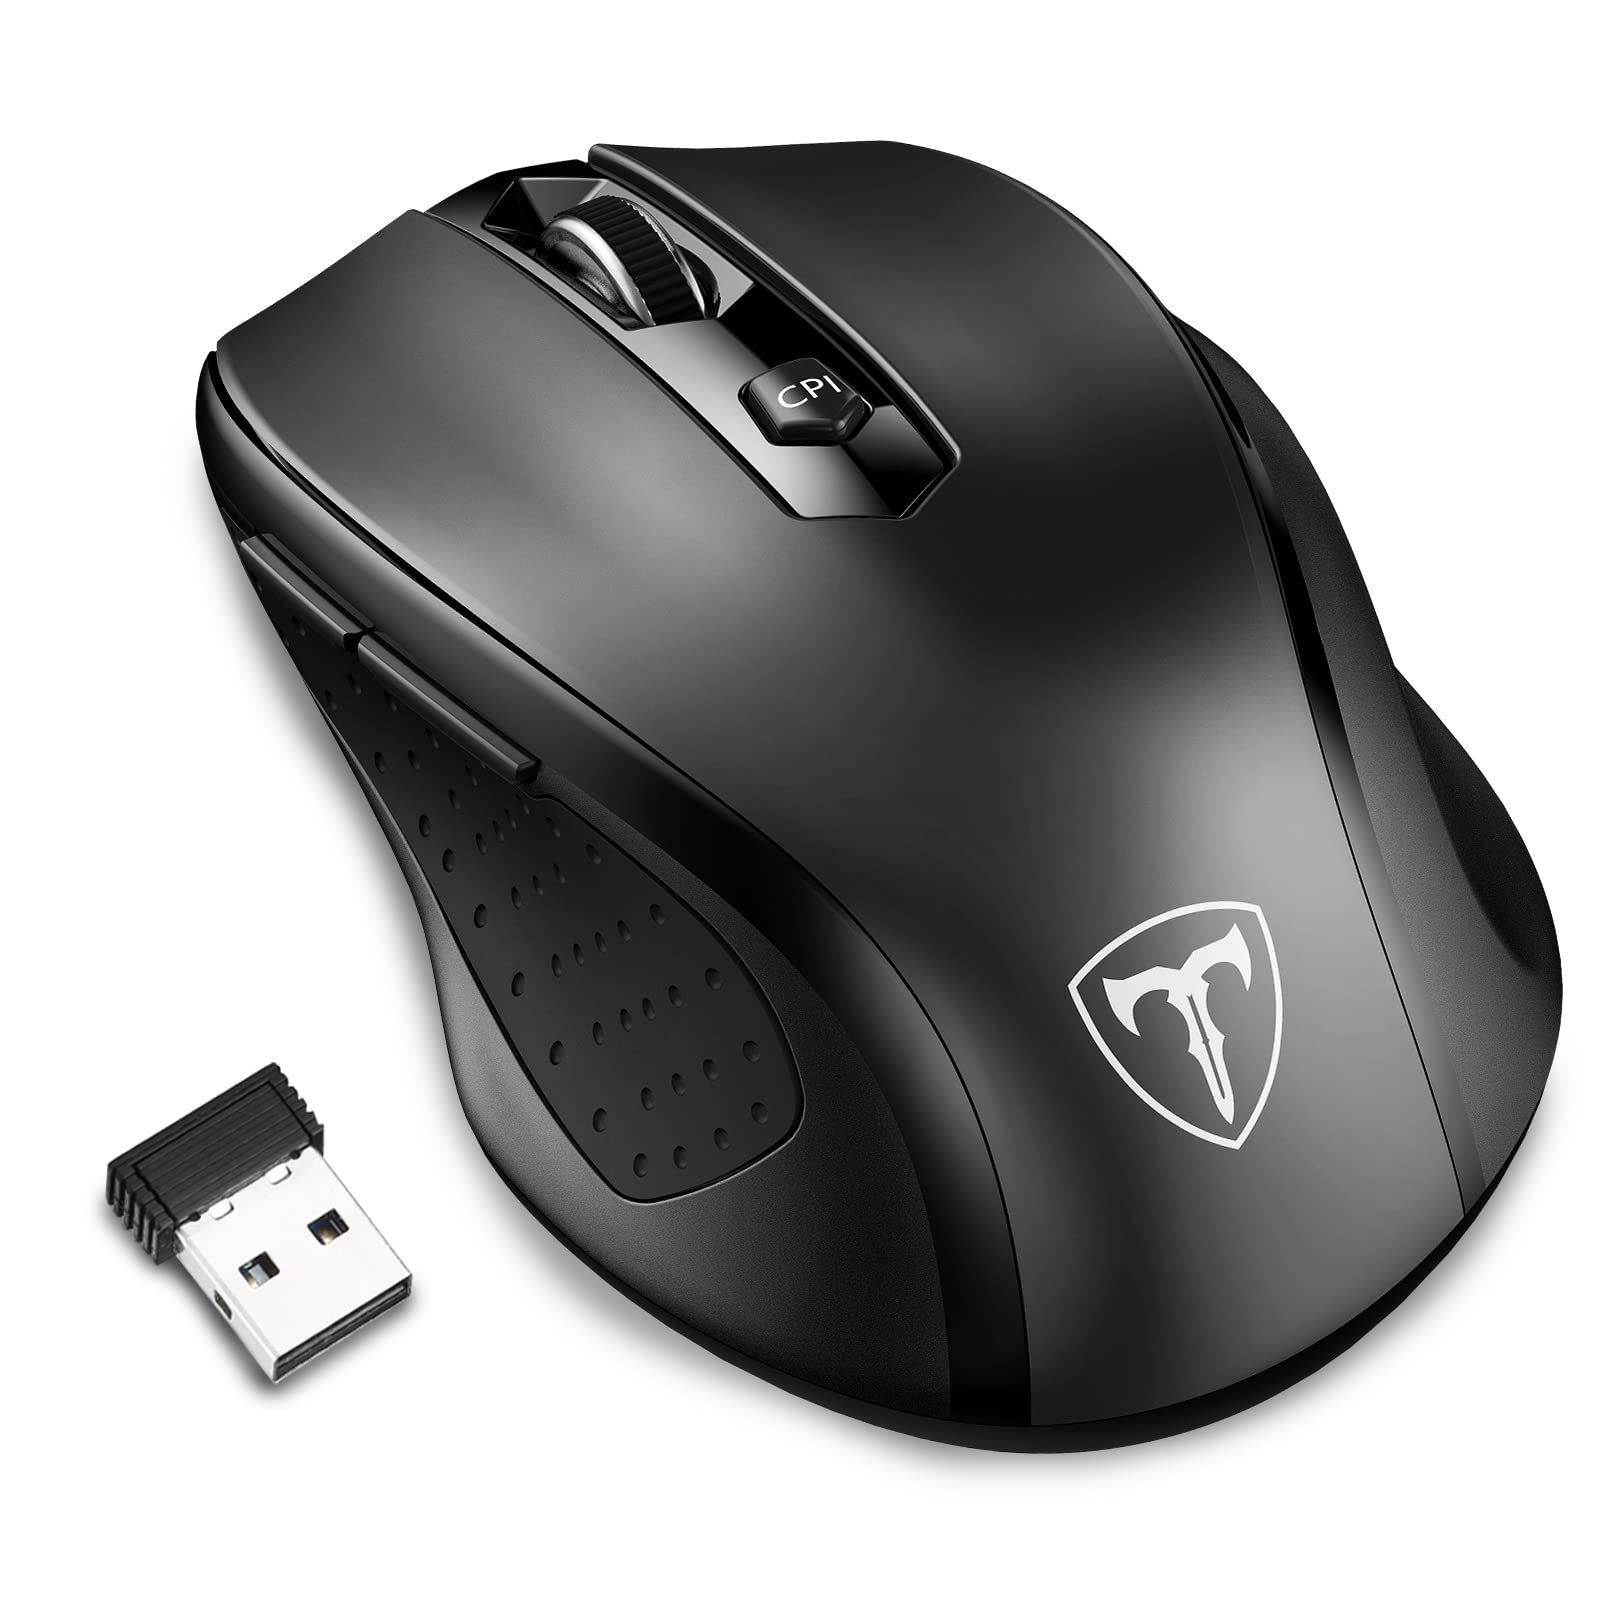 Lionsing Wireless Mouse ,2.4GHz Optical Computer Mouse with USB Receiver, 5 Adjustable DPI Levels, 6 Buttons Cordless Mouse for Laptop , PC, Computer, Desktop,Notebook,Macbook,Chromebook , Black